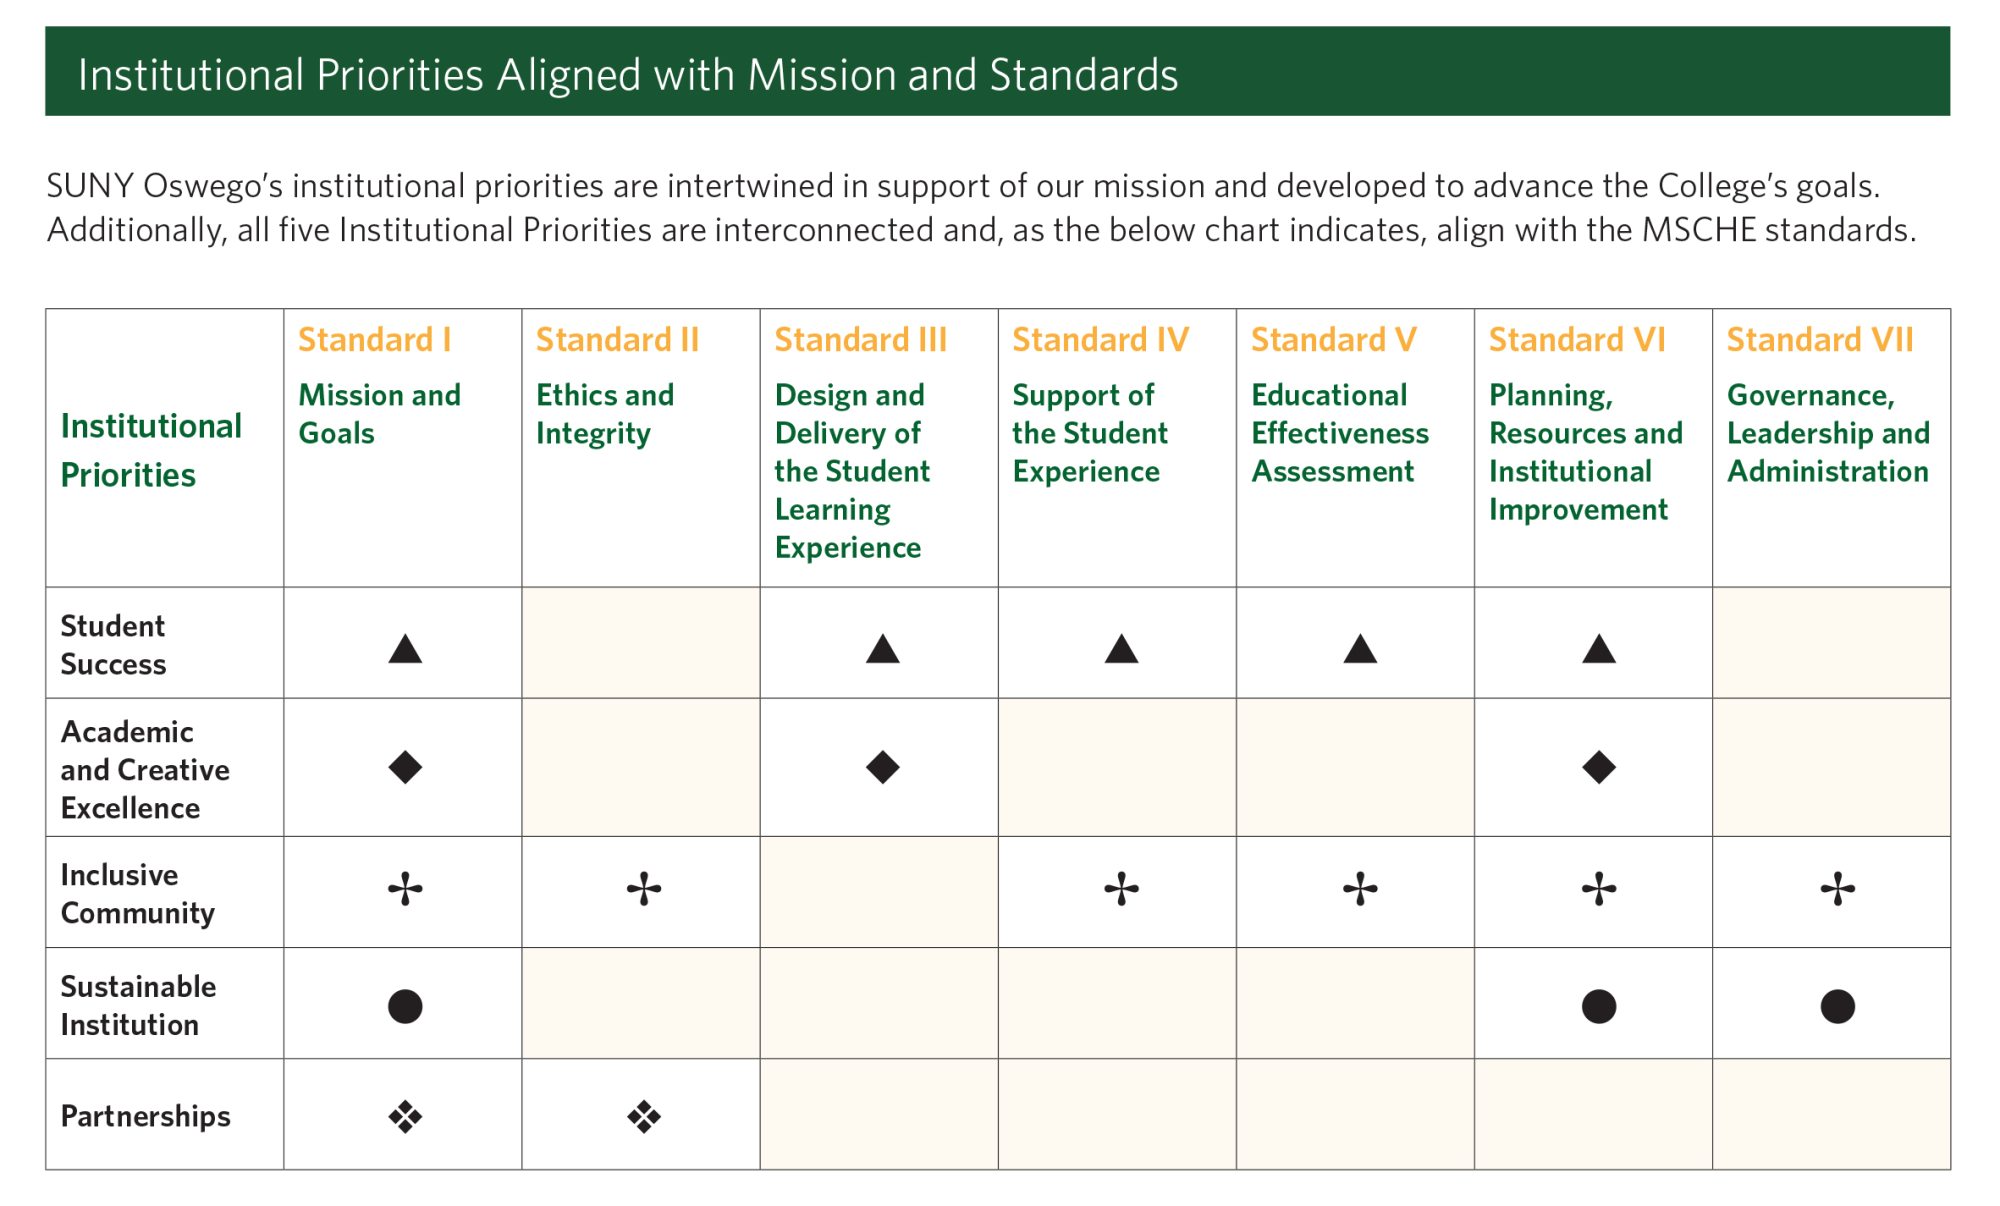 Institutional priorities aligned with mission and standards